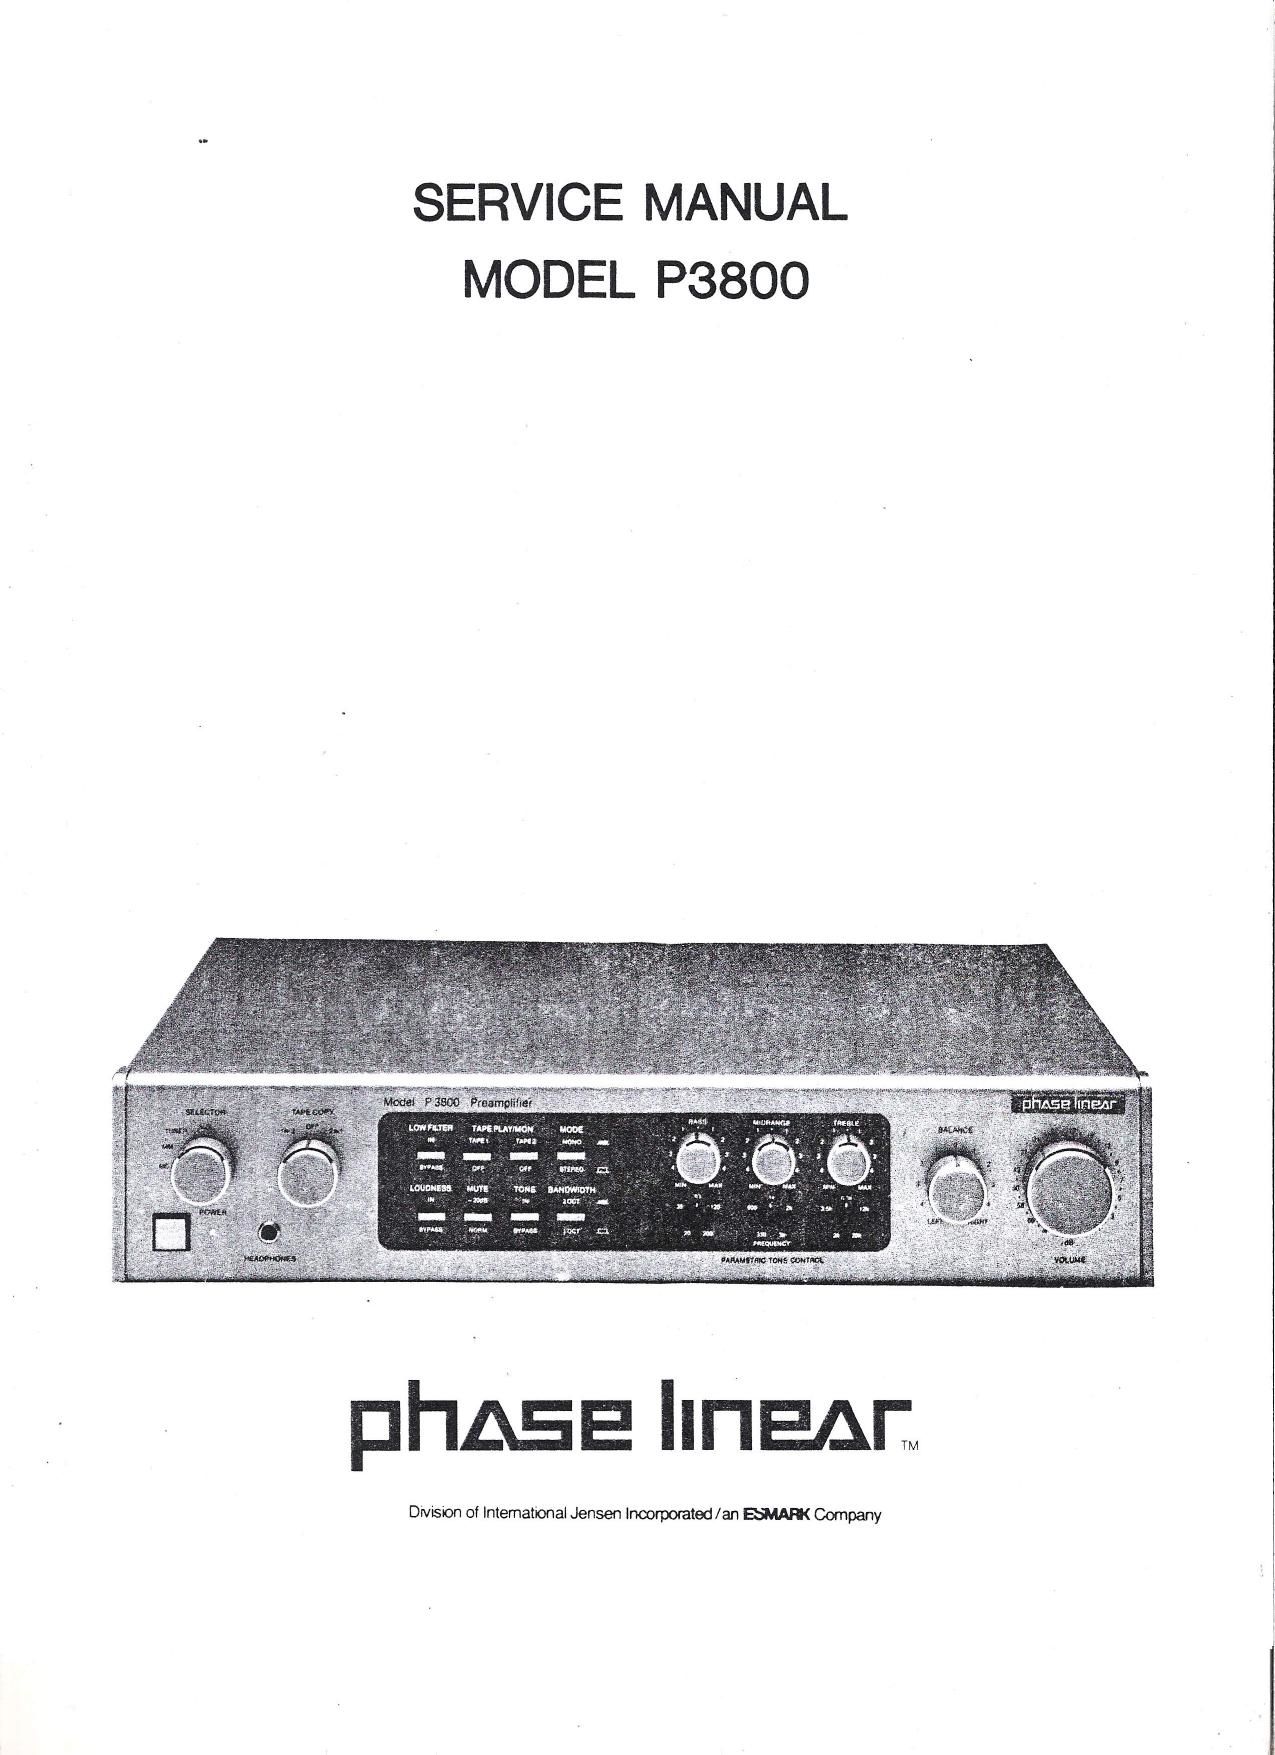 Phase Linear P 3800 Service Manual